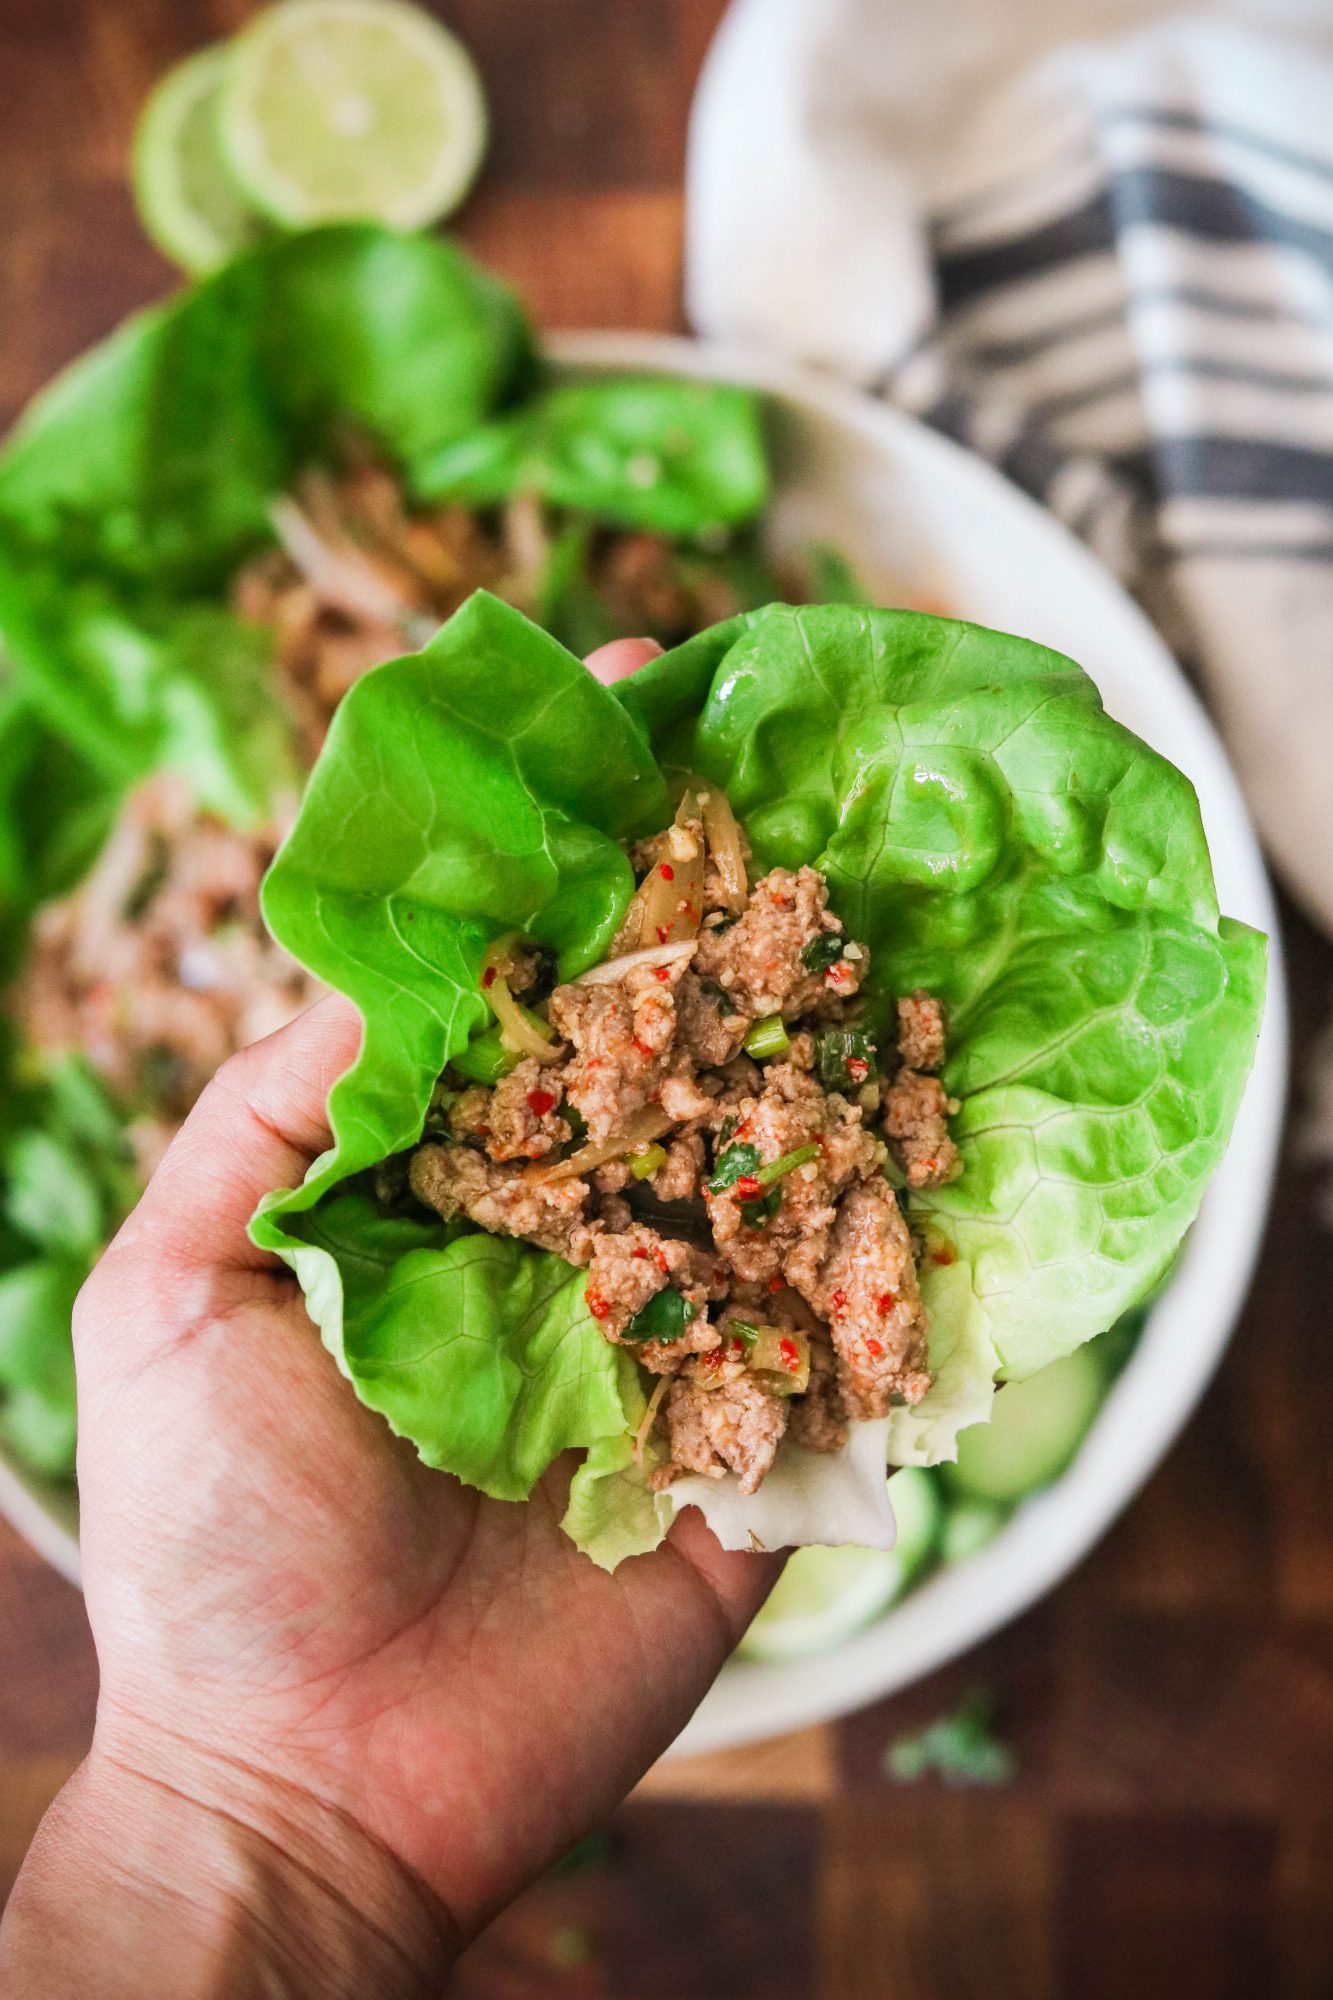 Hand lifting up larb moo in a lettuce wrap